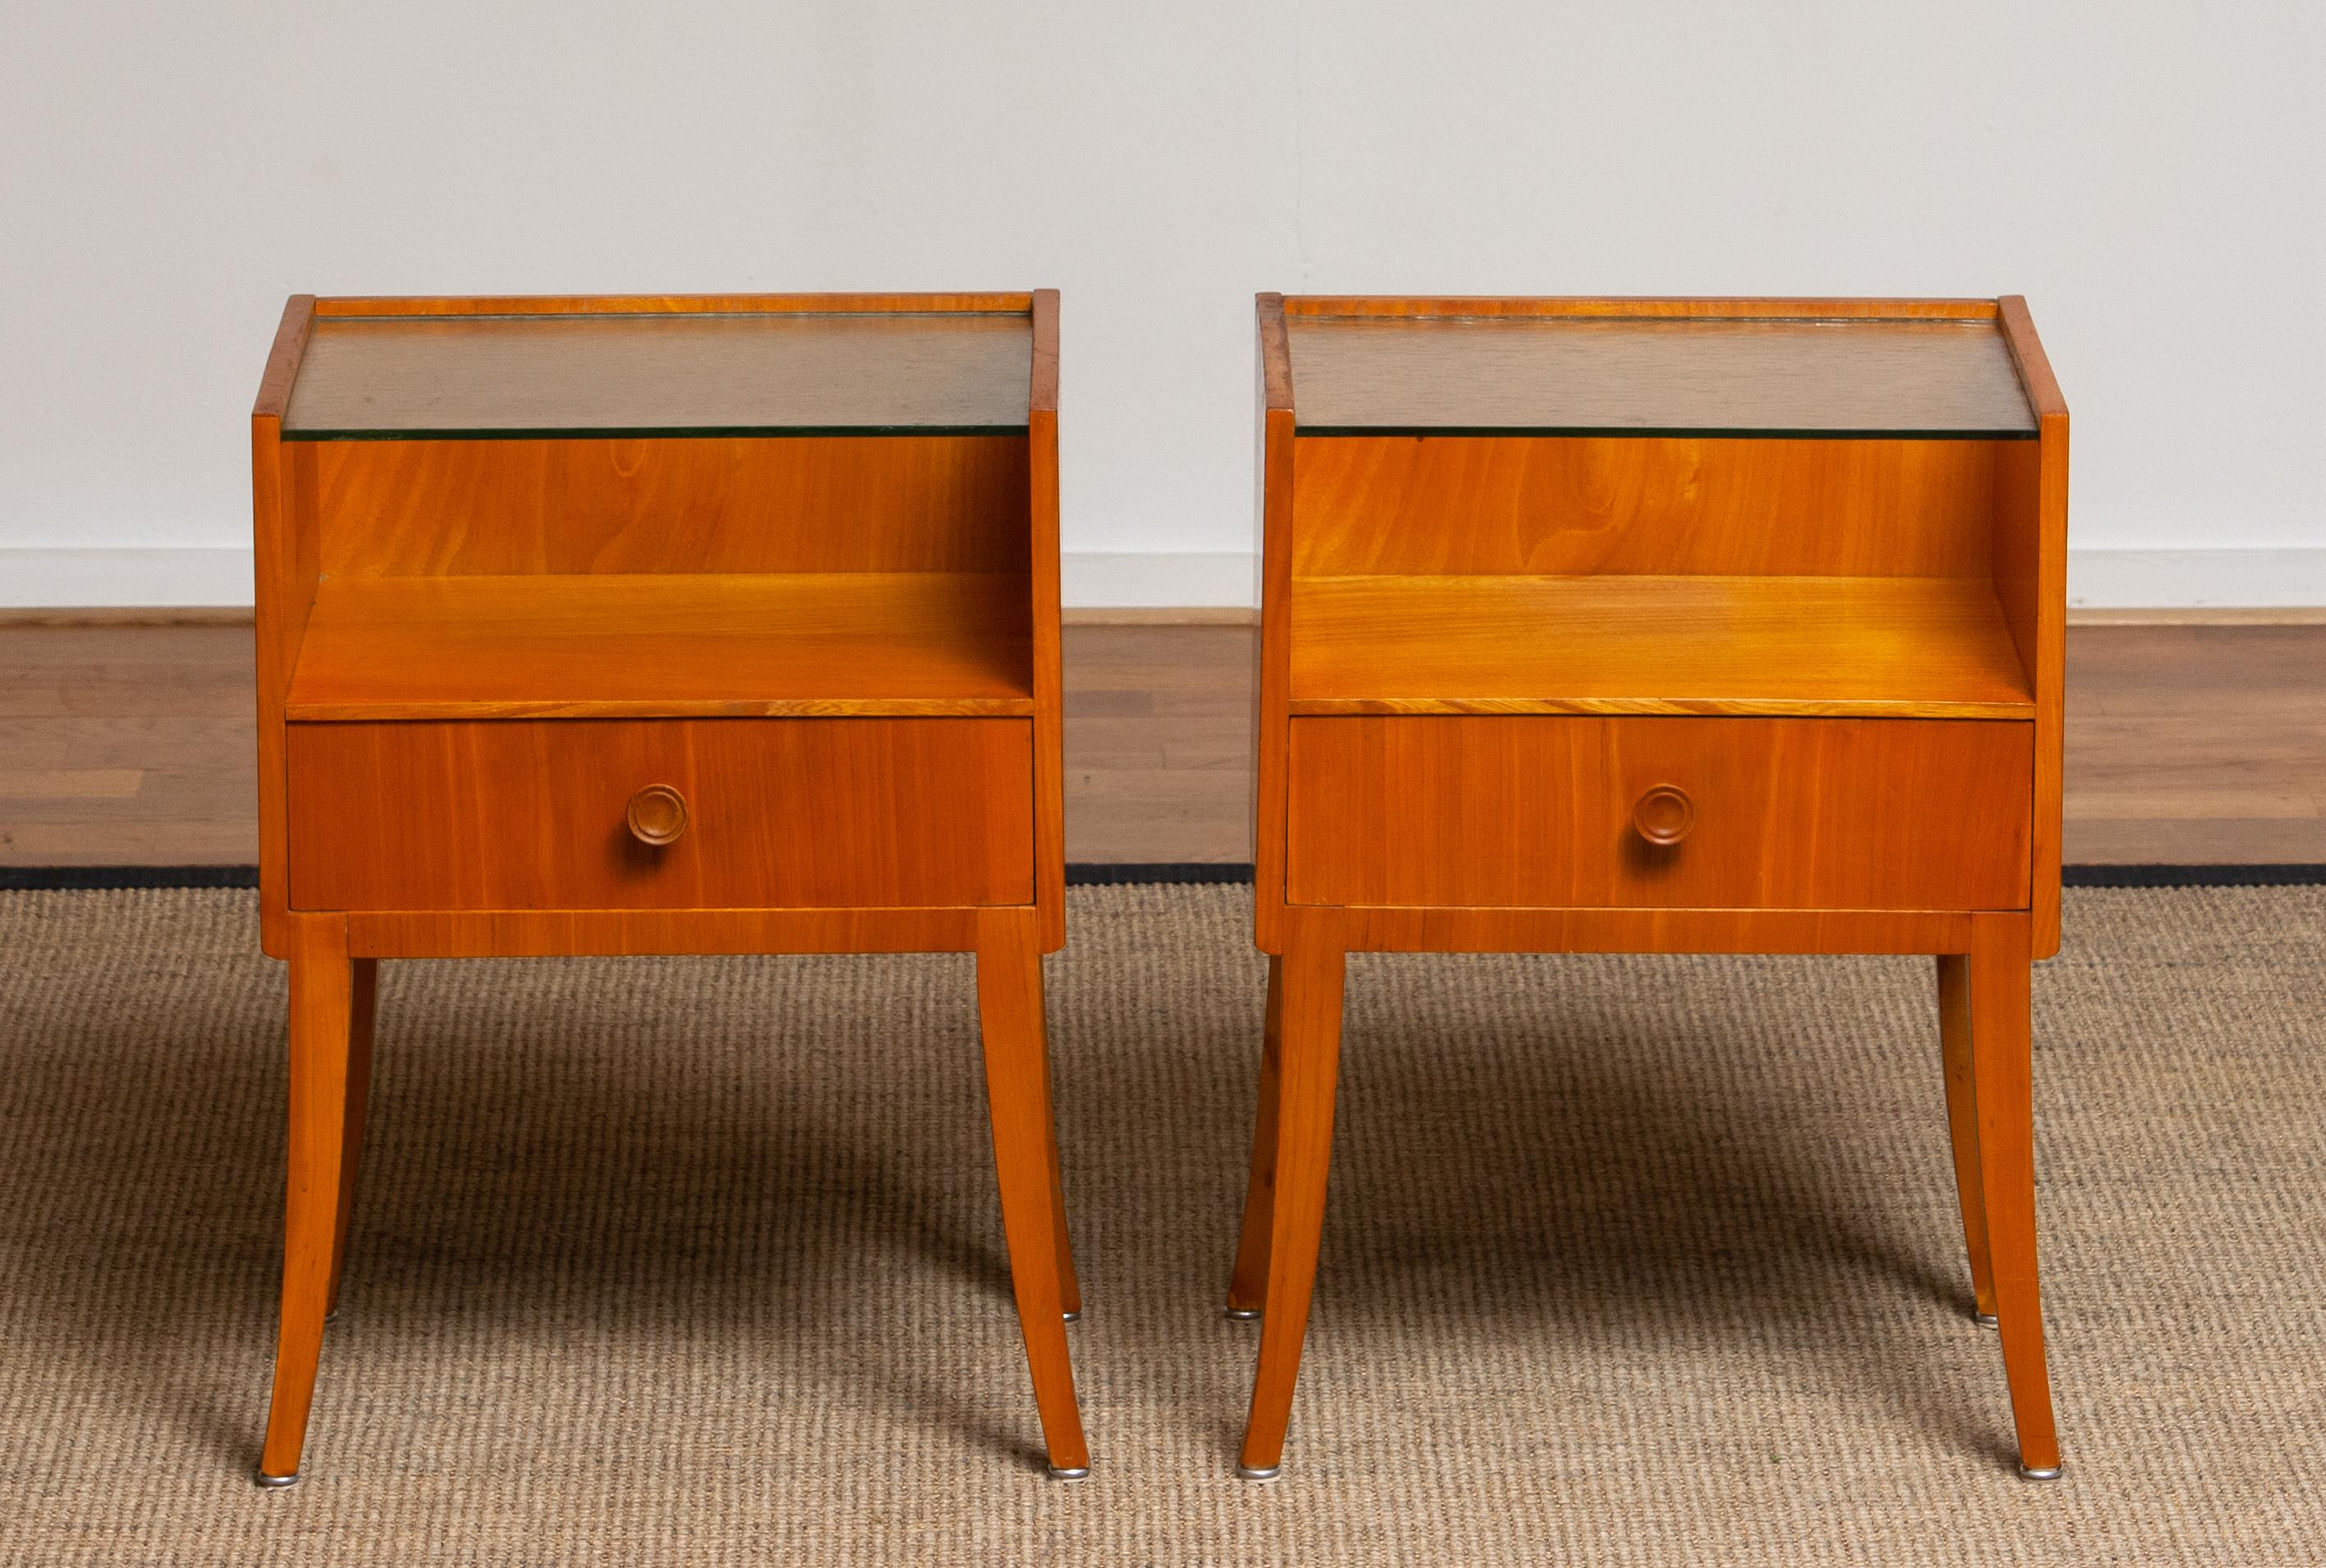 Mid-20th Century 1950s Pair of Nightstands or Bedside Tables from Sweden in Elm with Glass Top